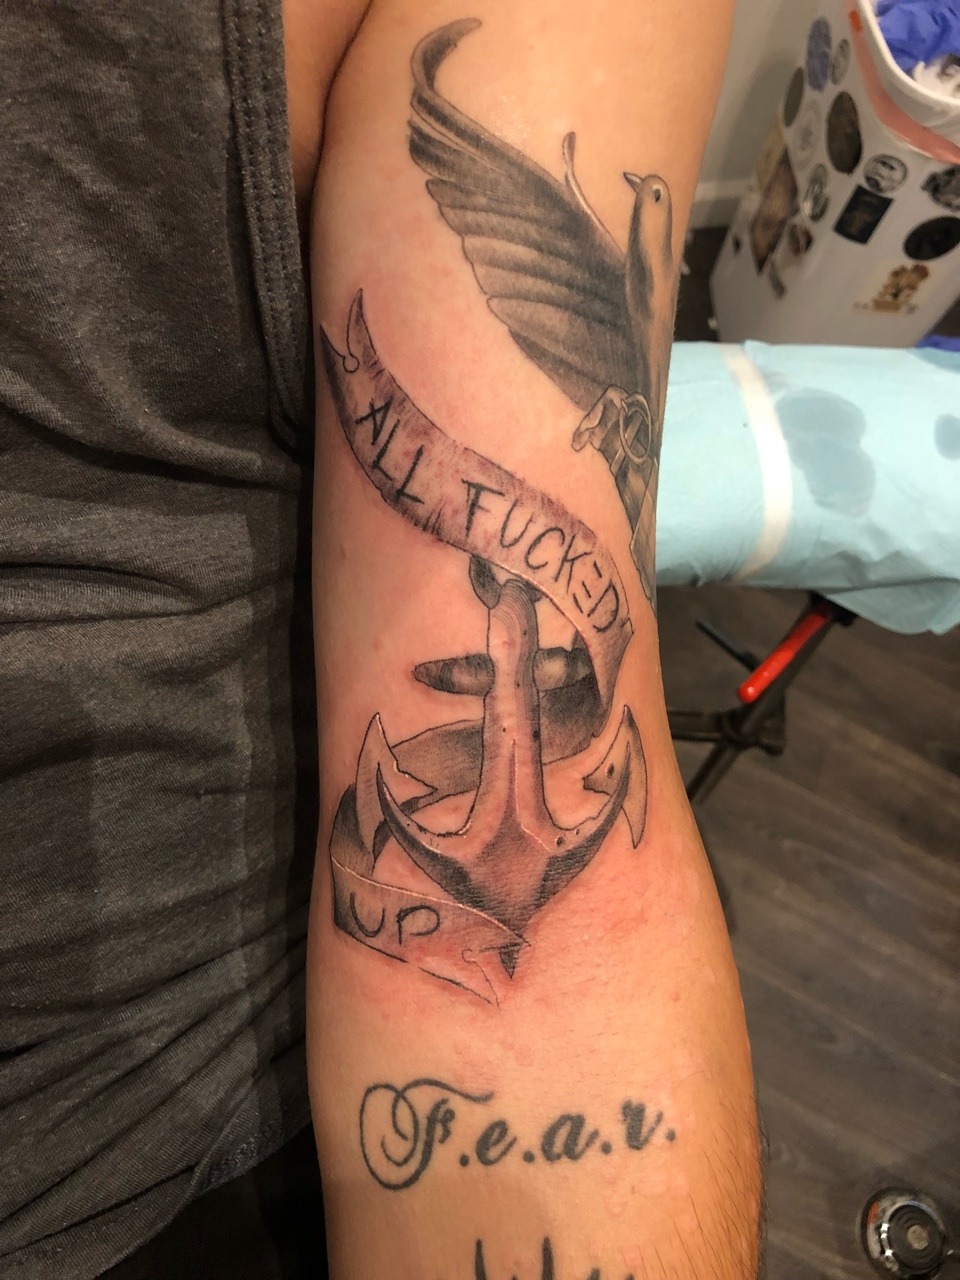 Got my amity affliction inspired reaper done today by Jinx Cooper at Image  tattoo in Exeter  rtattoos